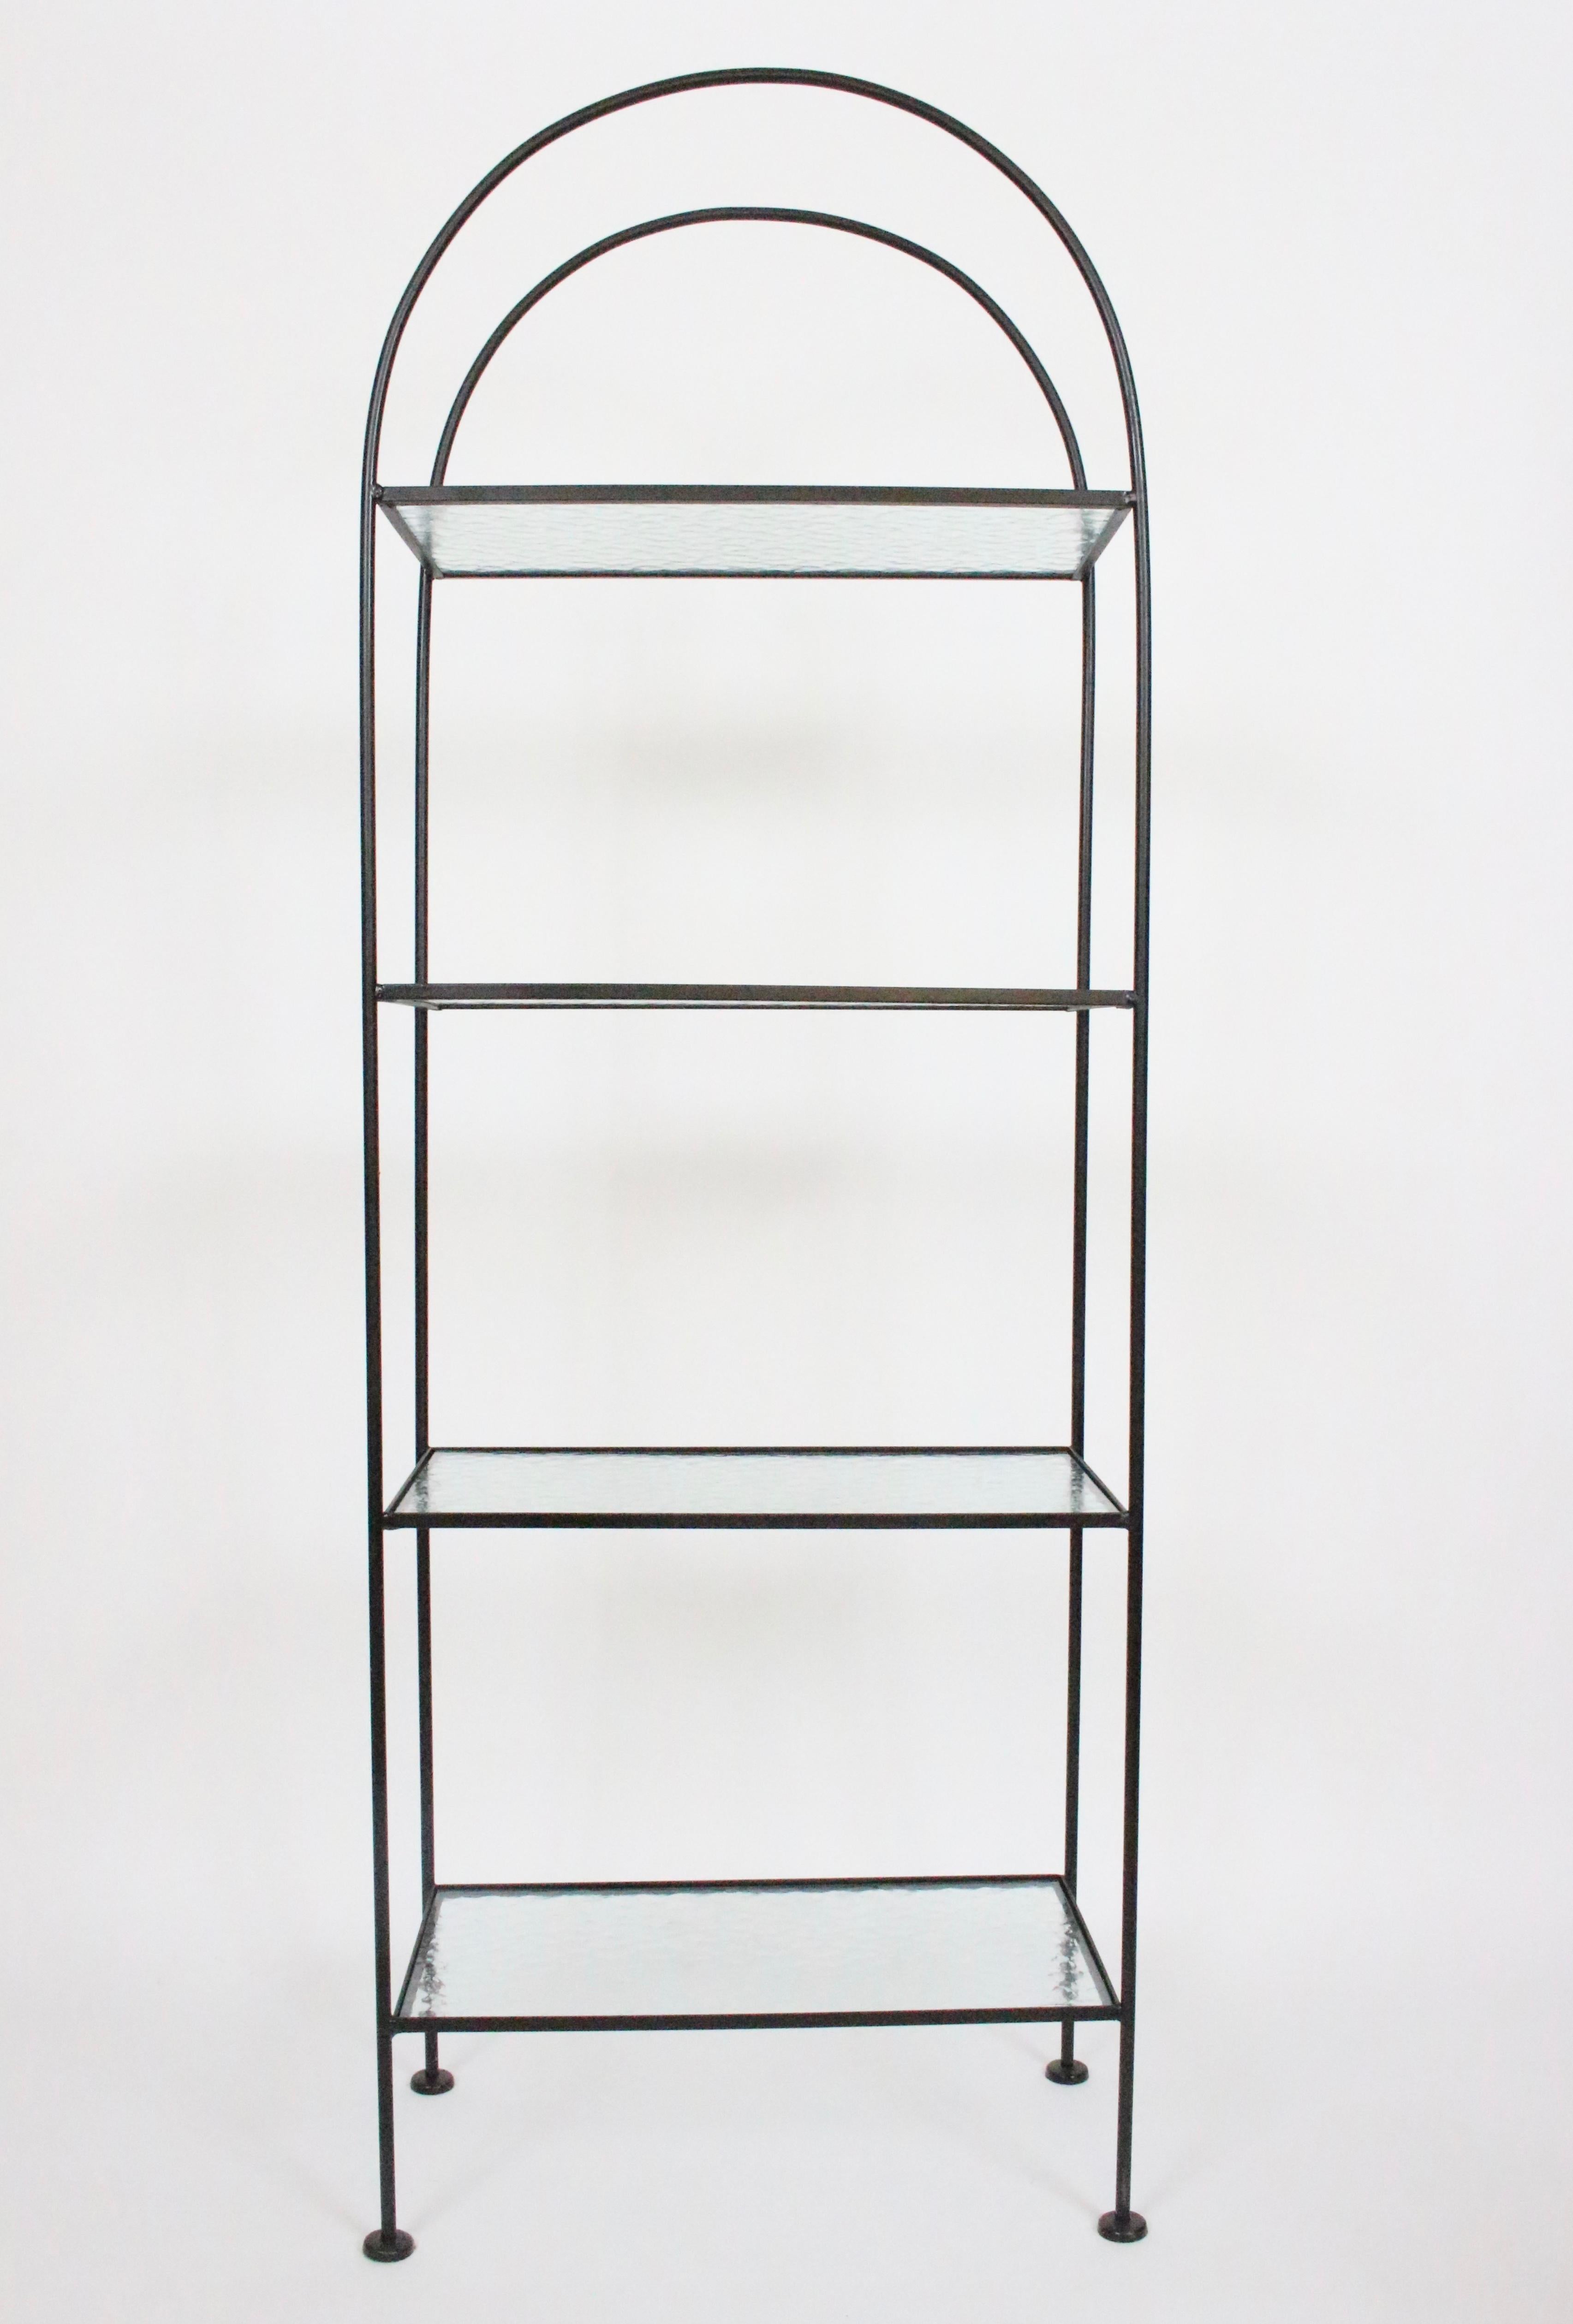 Russell Woodard four tier black iron étagère with original water glass shelves, circa 1960. Featuring a rounded top with sturdy black enameled framework, 4 original rippled tempered .25